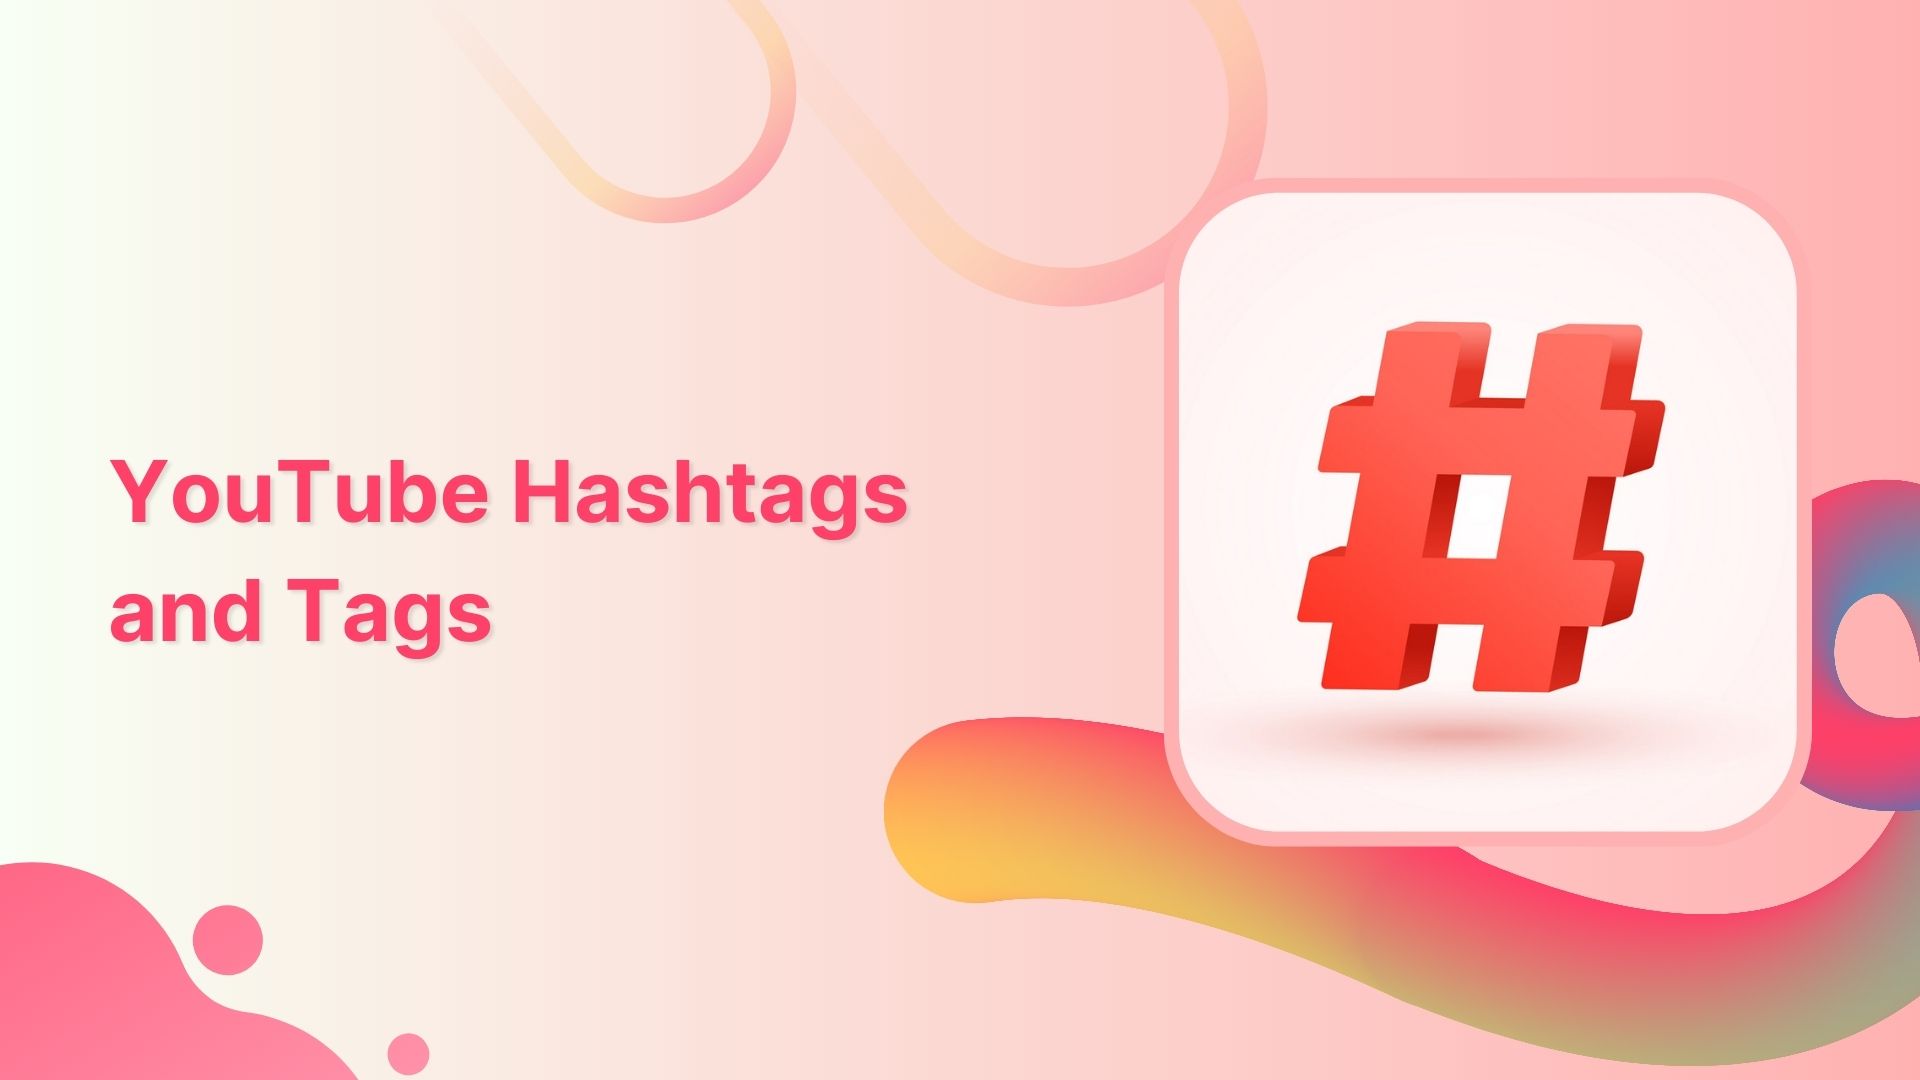 YouTube Hashtags & Tags: How to Use Them Effectively